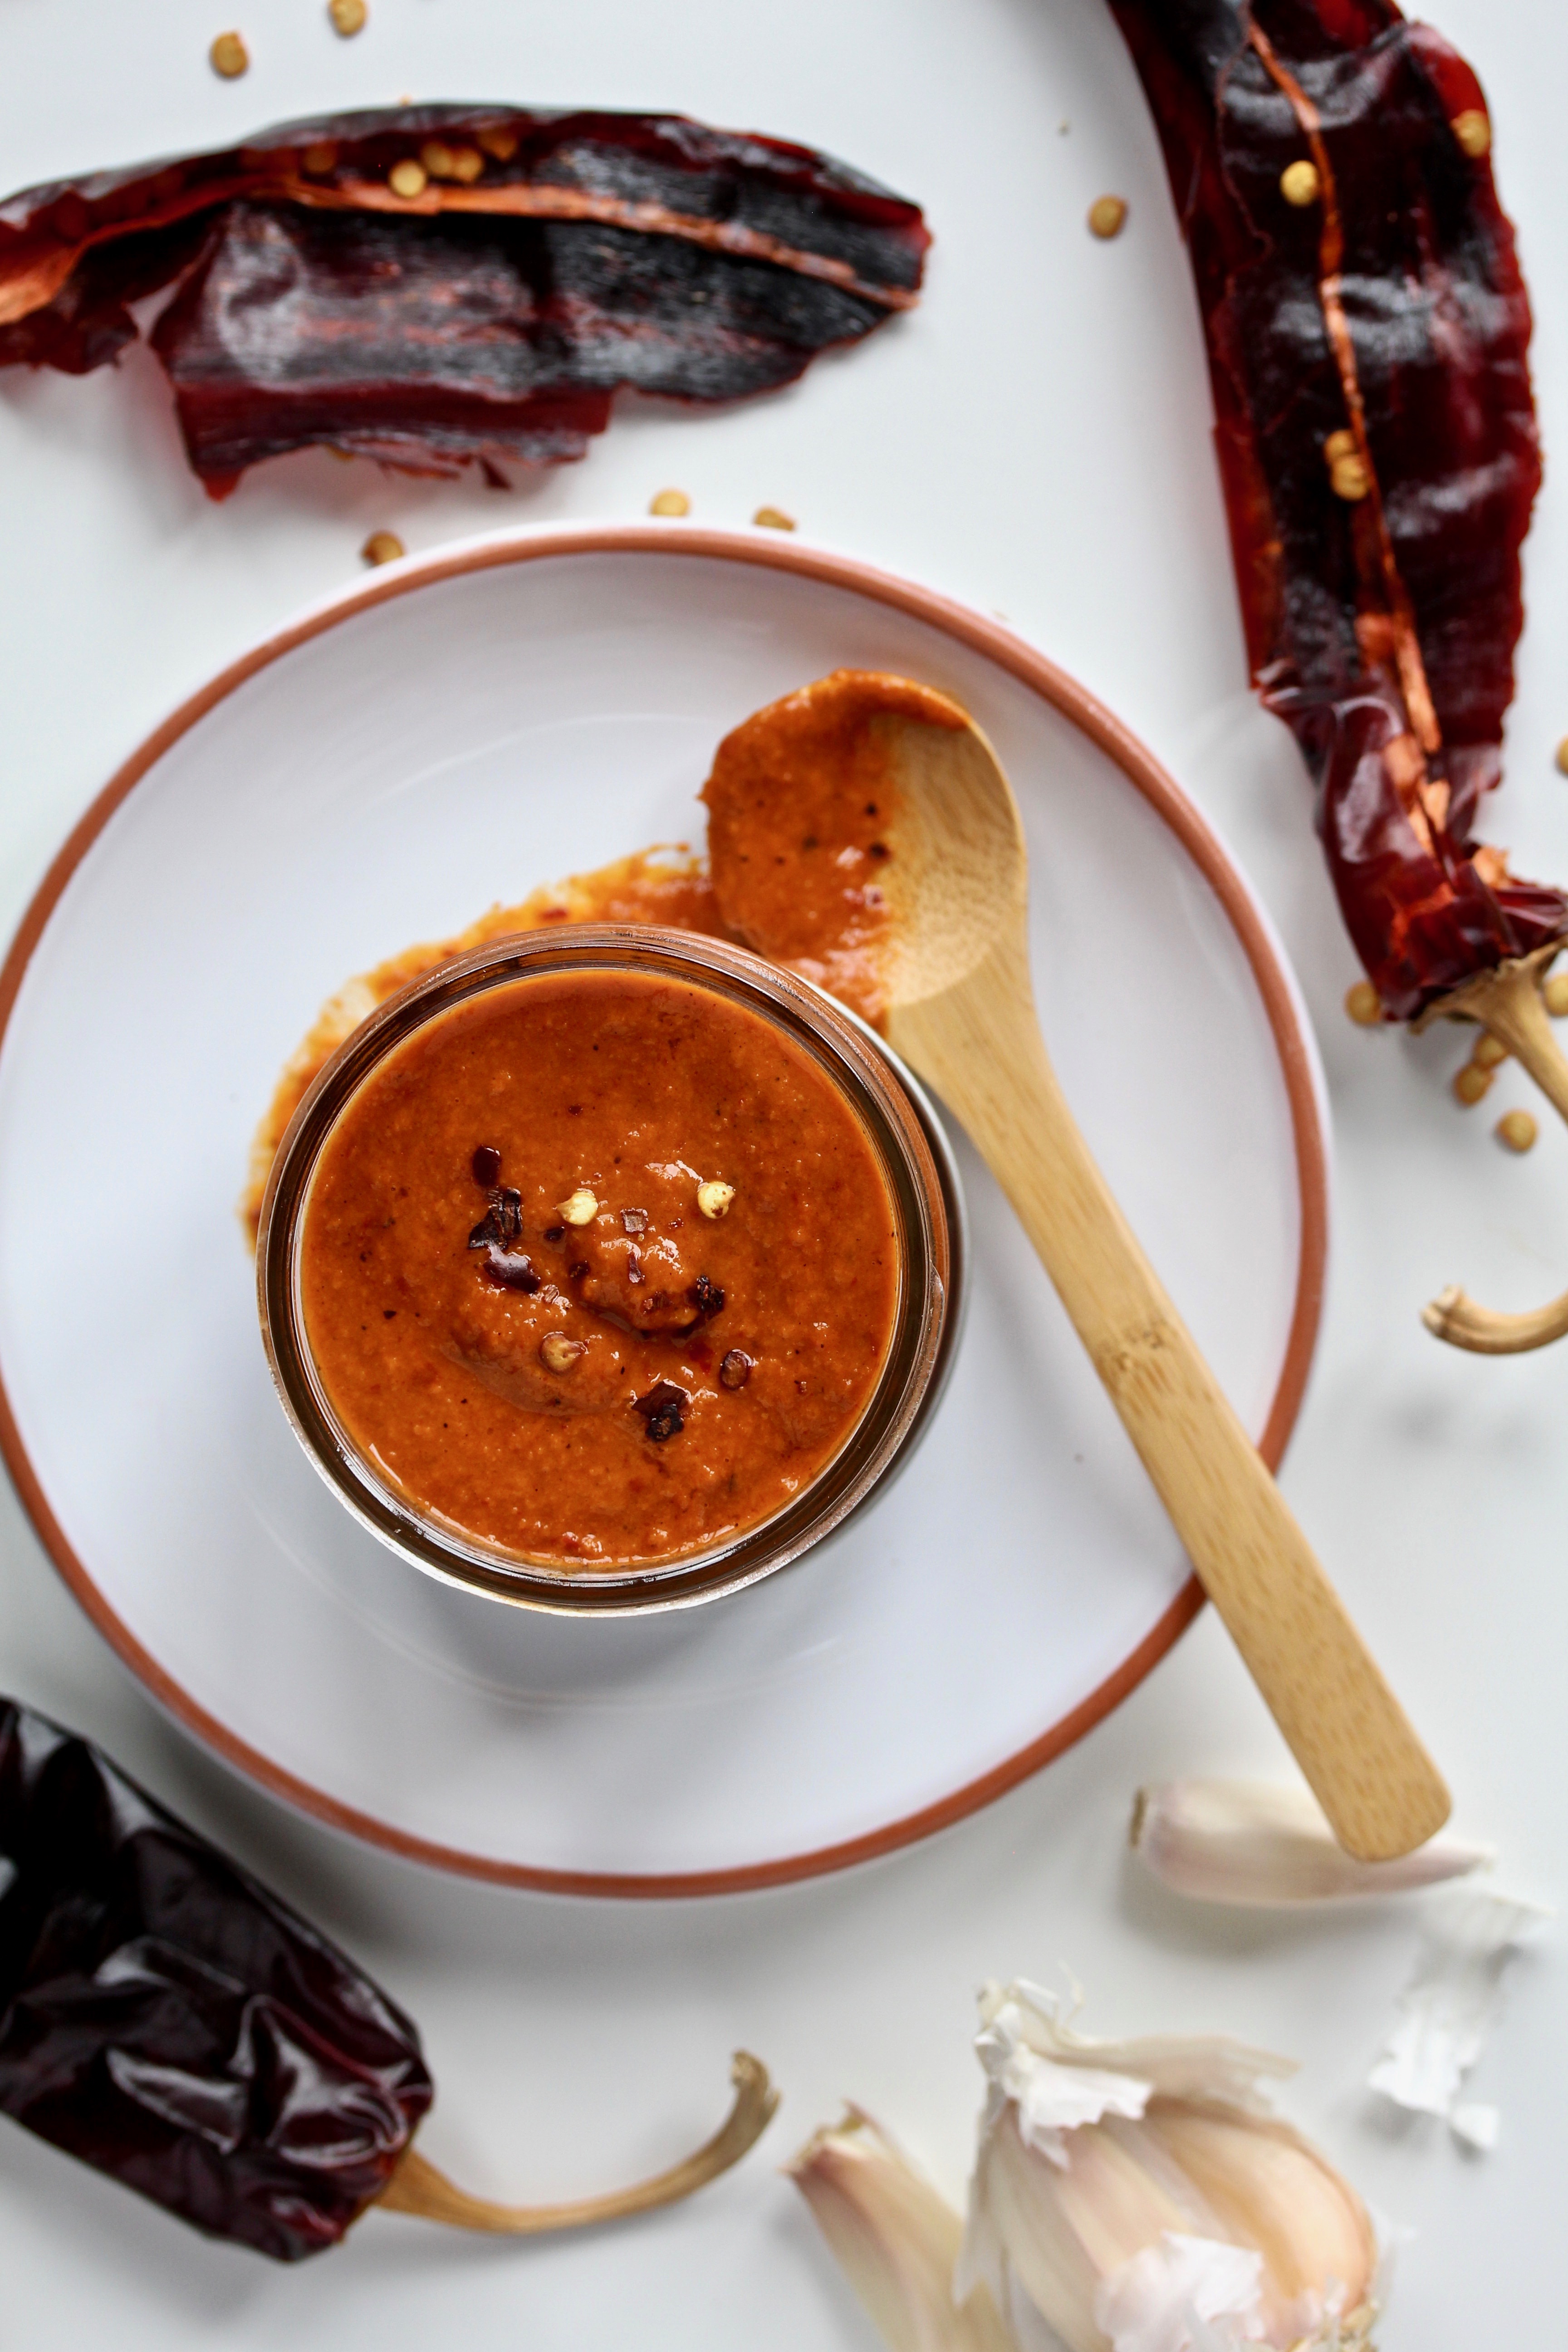 Every smart cook knows a great sauce makes a great meal! Learn how to make this simple Mojo Rojo sauce for weeknight dinner success! @cookinRD | sarahaasrdn.com 